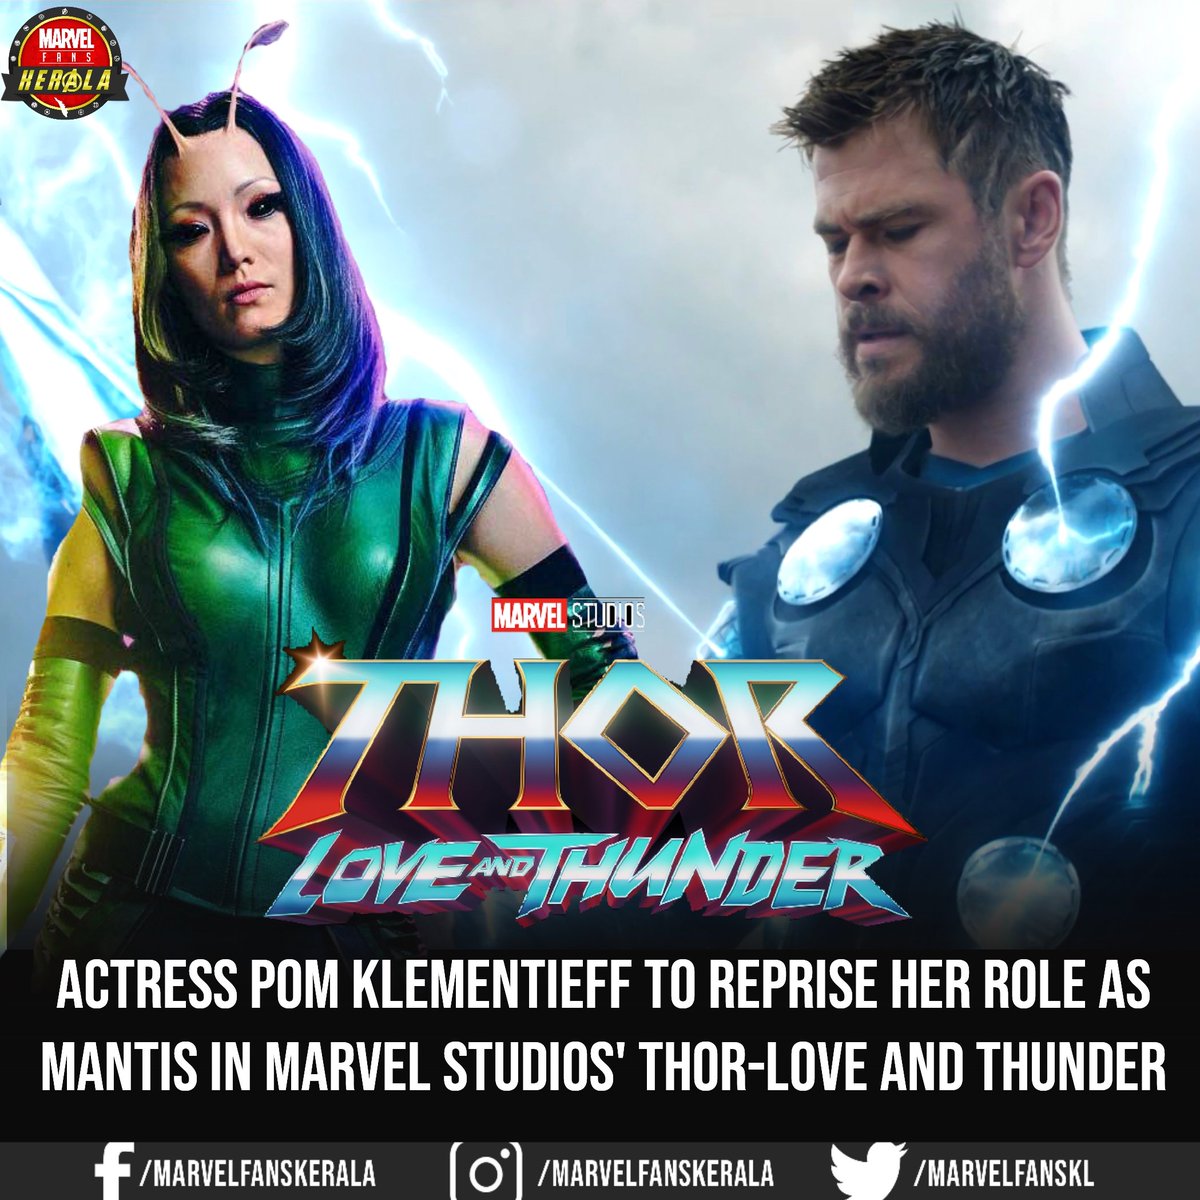 In a new post on her Instagram account, Mantis actress @PomKlementieff posted that she has landed in Sydney, Australia, where the shoot for Thor: Love and Thunder is set to take place.

#MarvelFansKerala #ThorLoveAndThunder #marvel https://t.co/kZfVODMAgQ